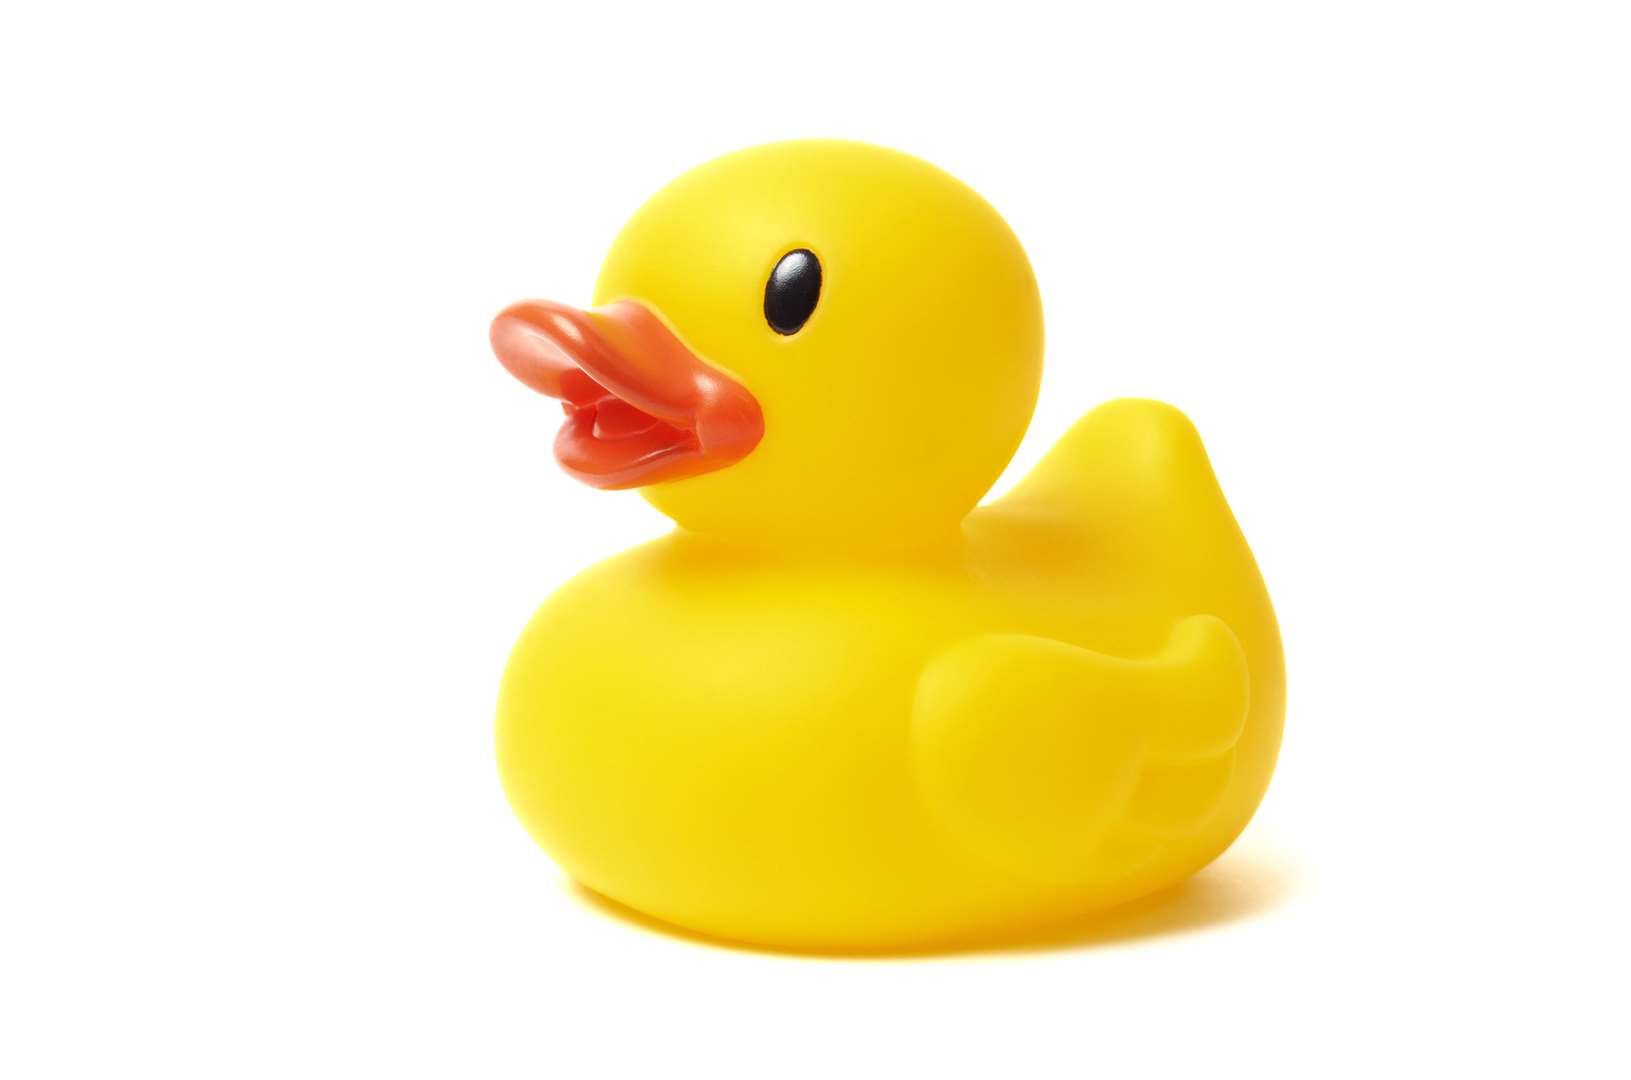 Some 1,800 ducks have already been sold.